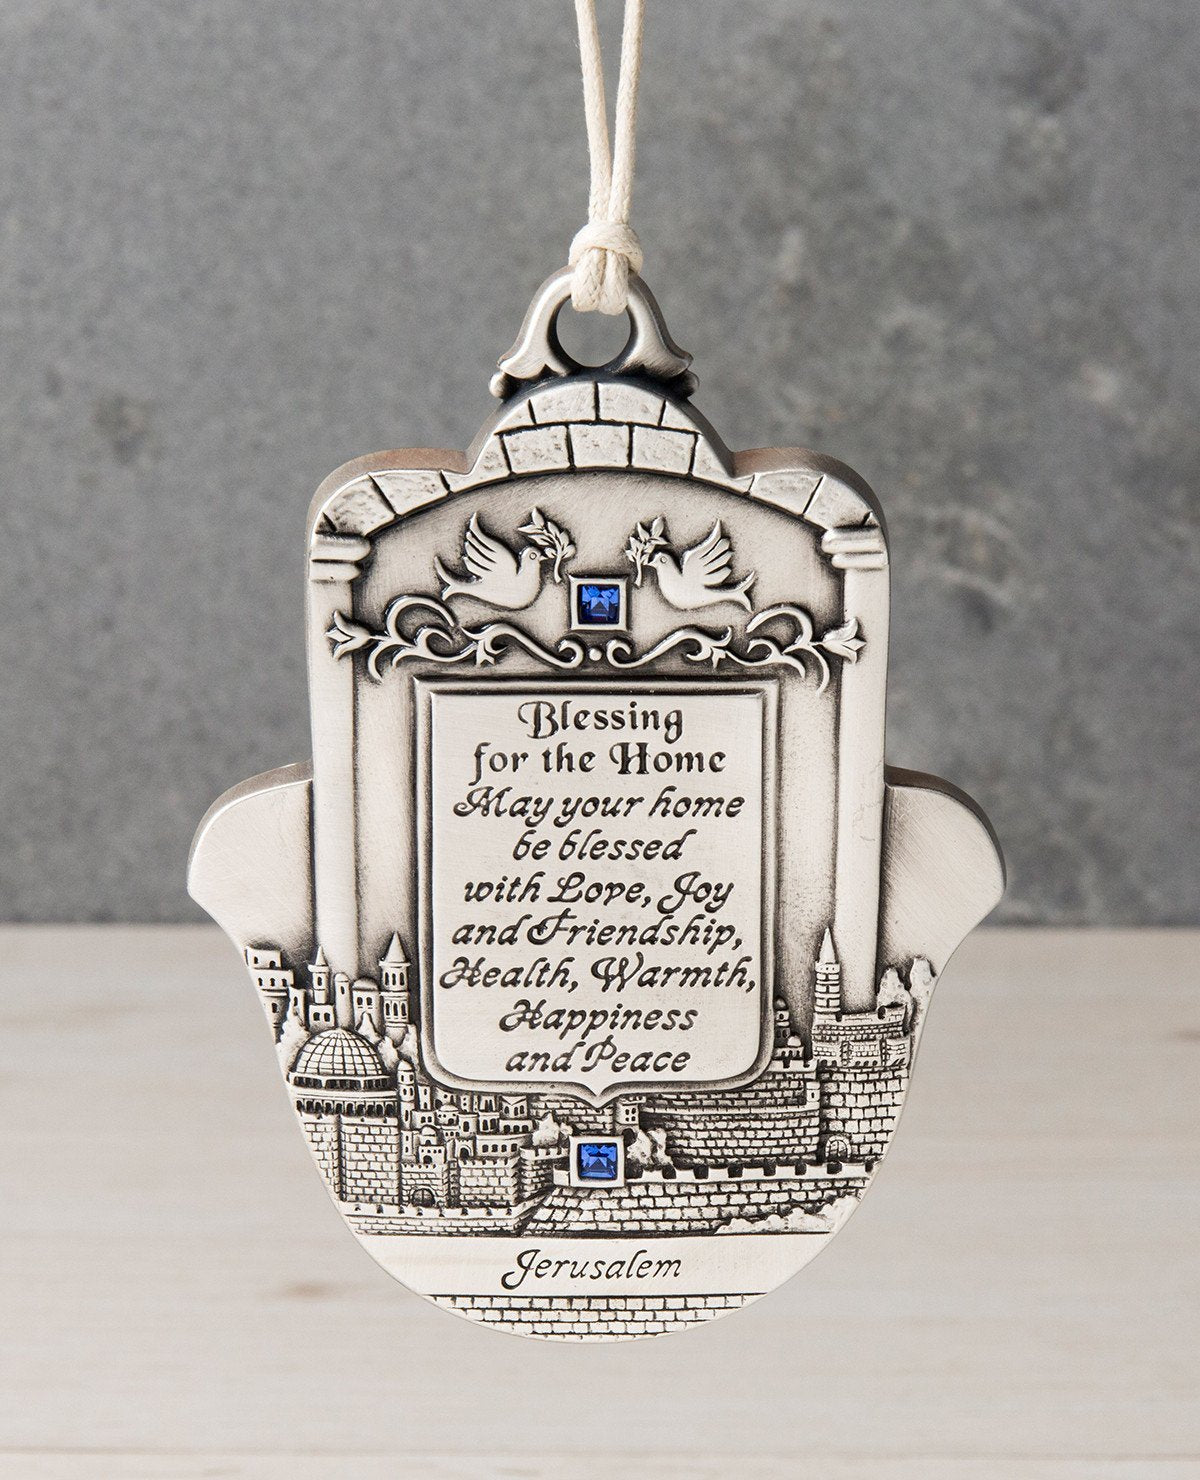 An impressively designed and uniquely decorated Hamsa hanging ornament coated in sterling silver. Decorated with an embossed image of Jerusalem and a pair of peace doves with an olive branch, alongside blessing words of love, joy, laughter and light for the home. Makes a thoughtful and loving gift that will brighten up any house. The Hamsa is embedded with blue Swarovski crystals and a natural colored faux leather string. 
Additional languages available: Hebrew and Russian.  Length: 13 cm  Width: 10 cm